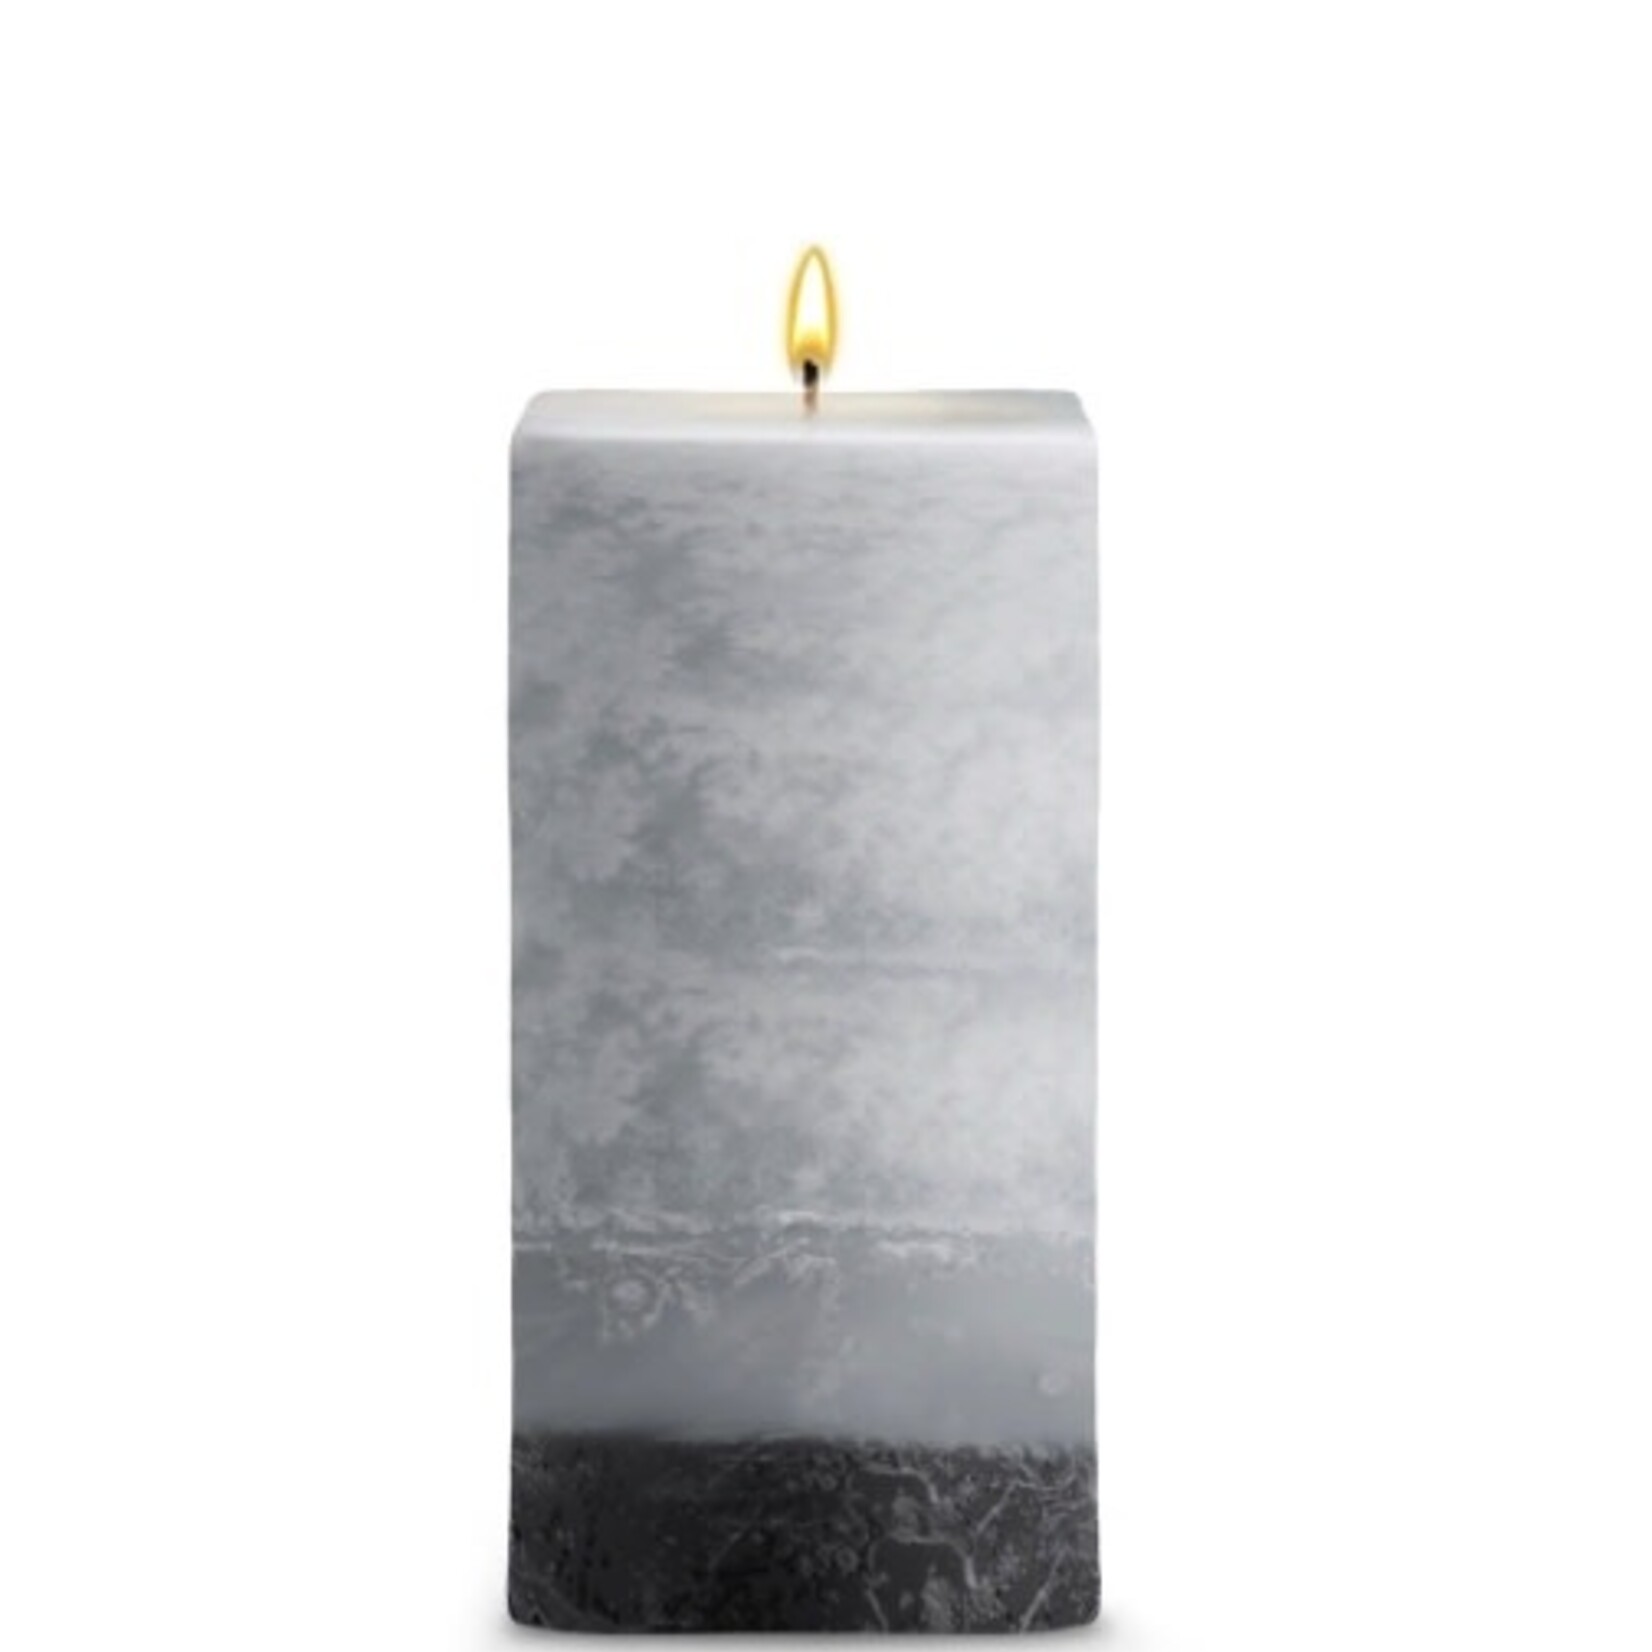 STONE CANDLES STONE PILLER CANDLES 3X6 SQ L'HOMME